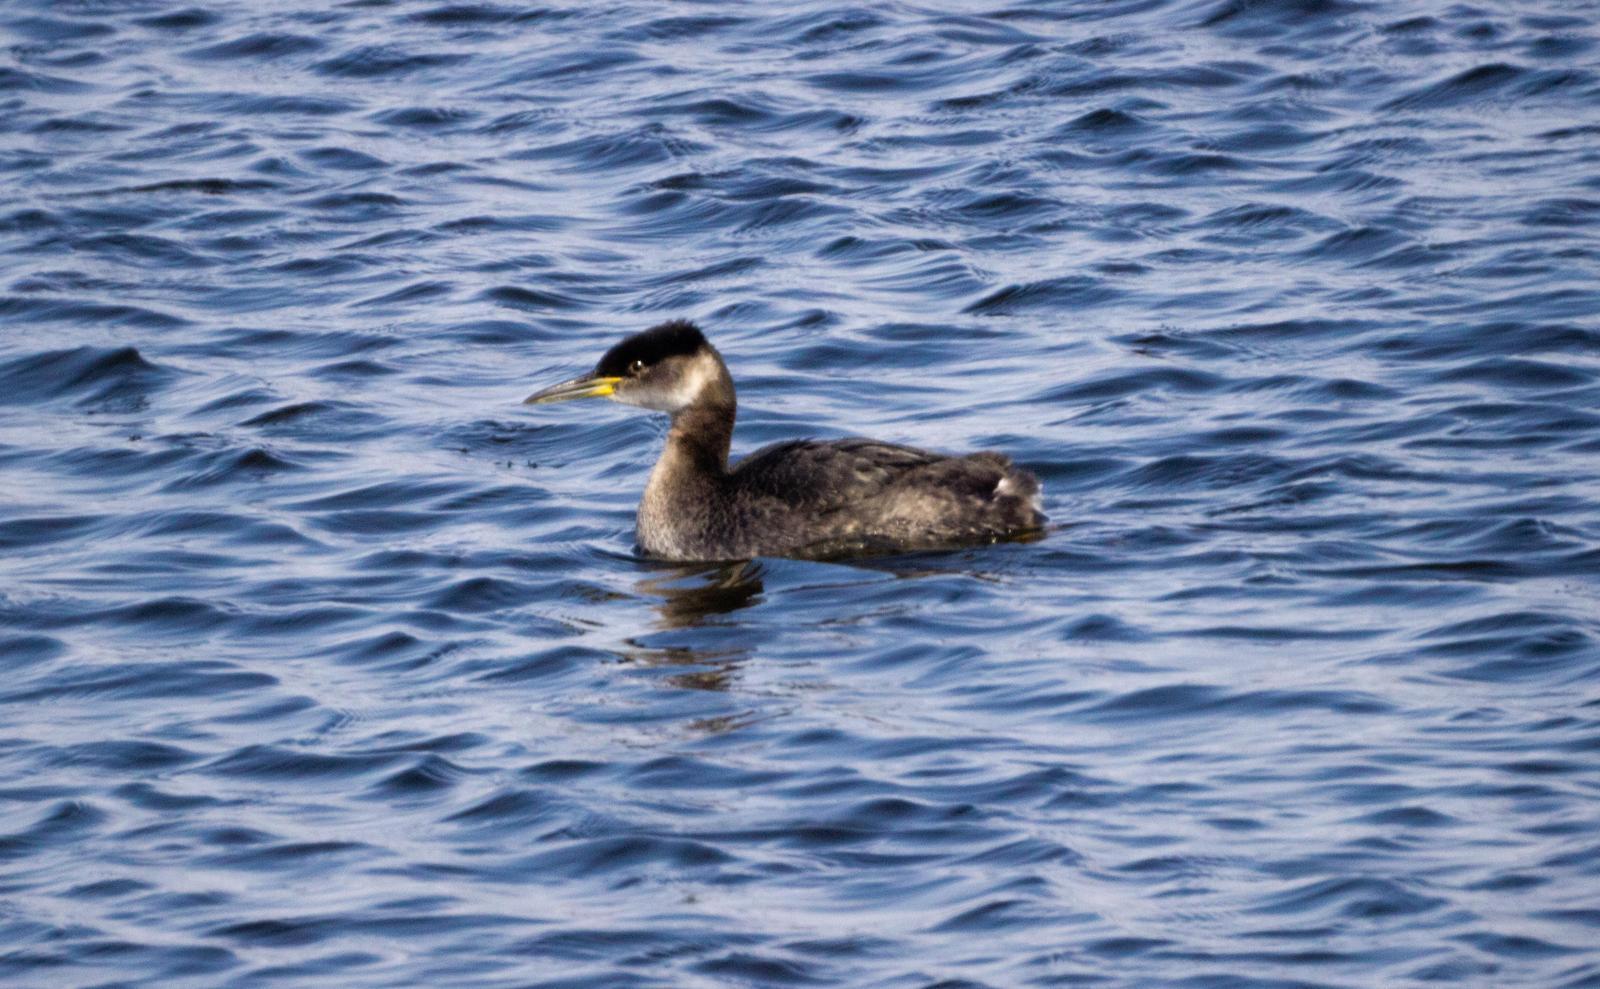 Red-necked Grebe Photo by Darrin Menzo